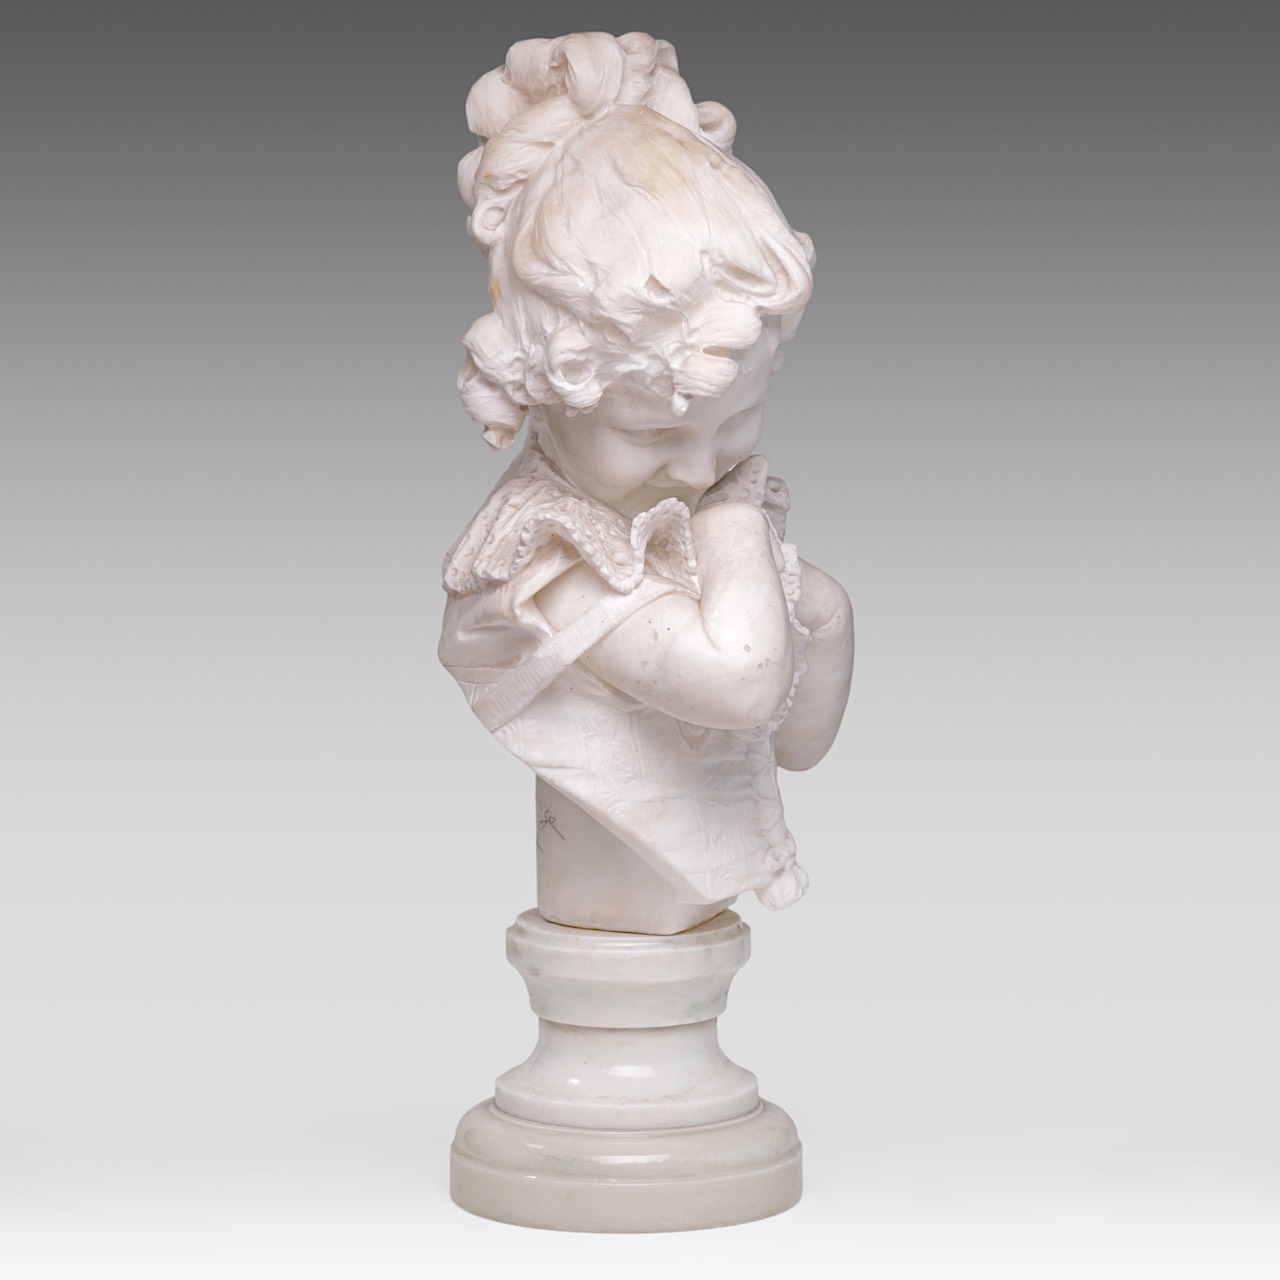 Studio of Pietro Bazzanti (1825-1895), the Carrara marble bust of a girl with a lacework collar, H 6 - Image 5 of 7